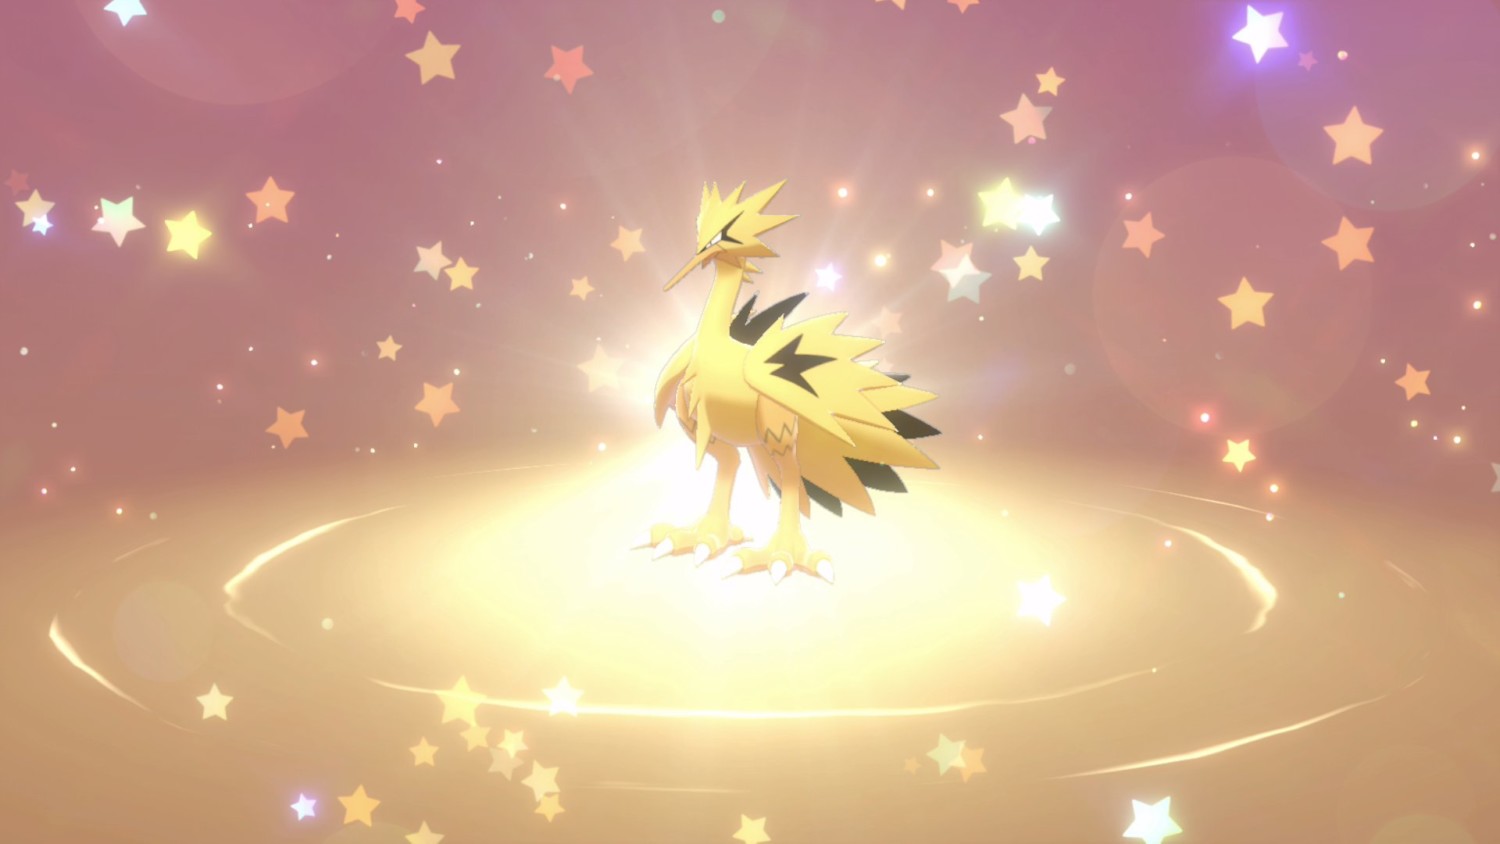 Shiny Galarian Zapdos Gift Now Available For Pokemon Sword/Shield